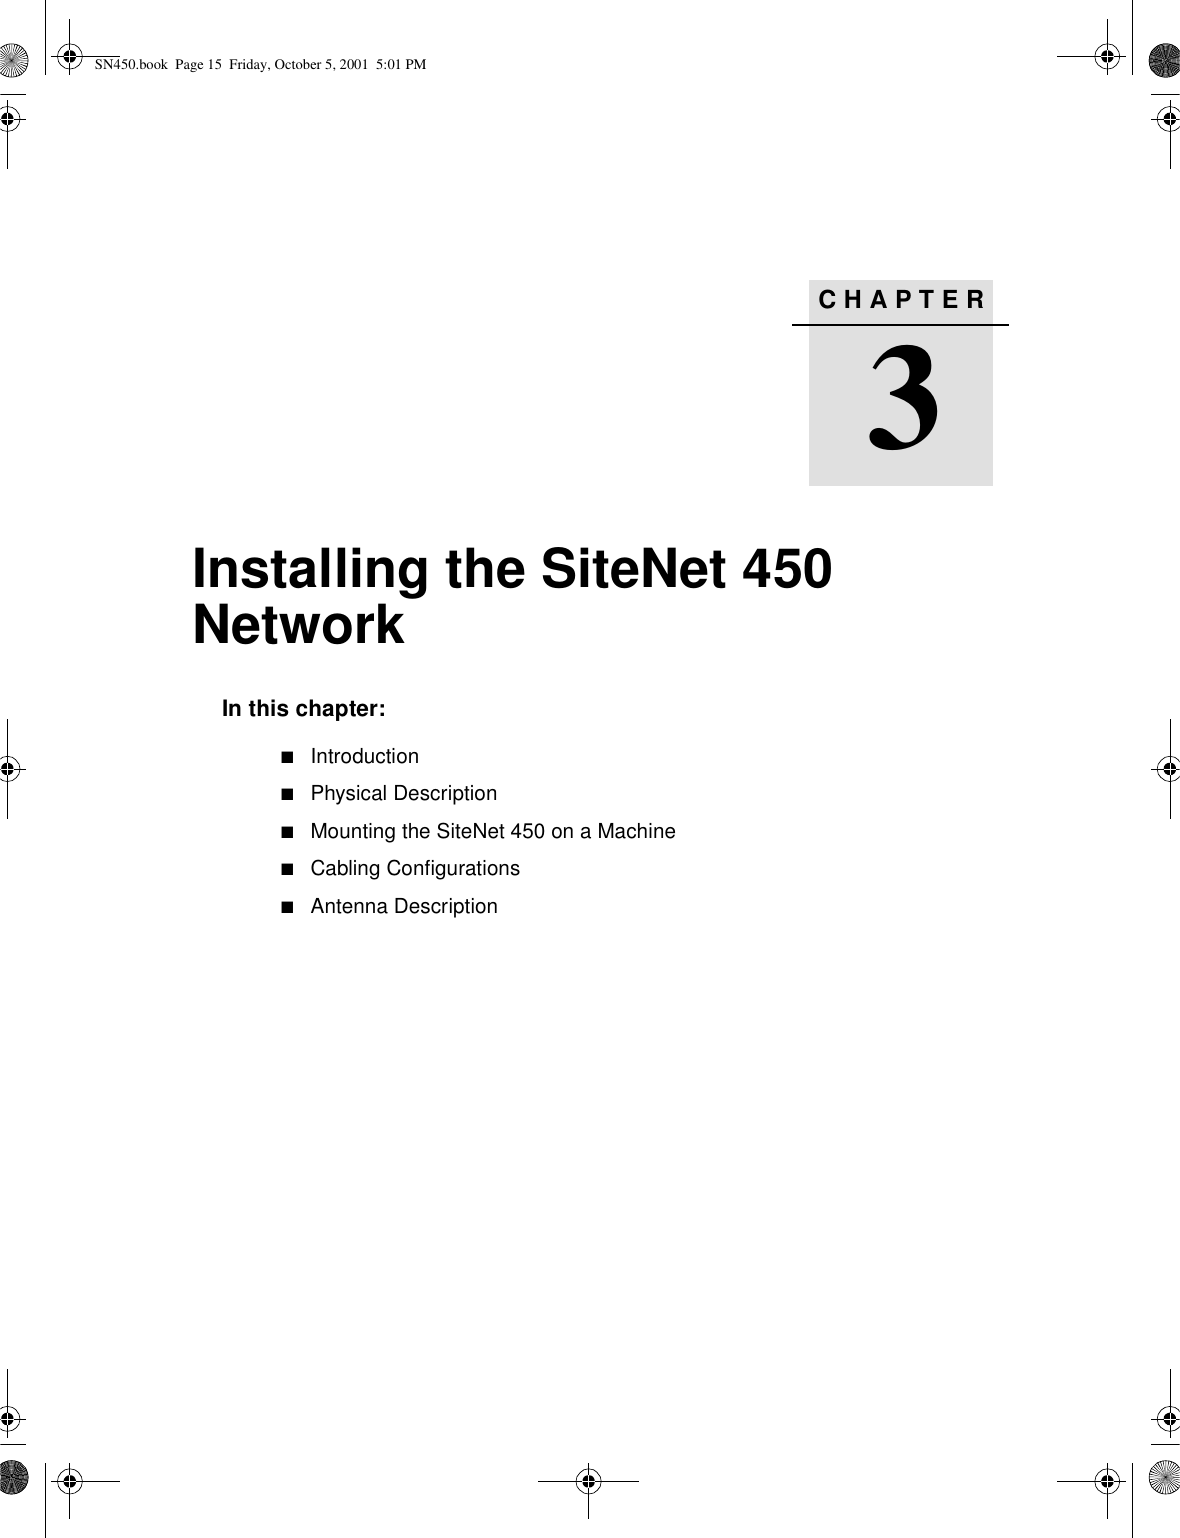 CHAPTER3Installing the SiteNet 450 Network3In this chapter:■Introduction■Physical Description■Mounting the SiteNet 450 on a Machine■Cabling Configurations■Antenna DescriptionSN450.book  Page 15  Friday, October 5, 2001  5:01 PM